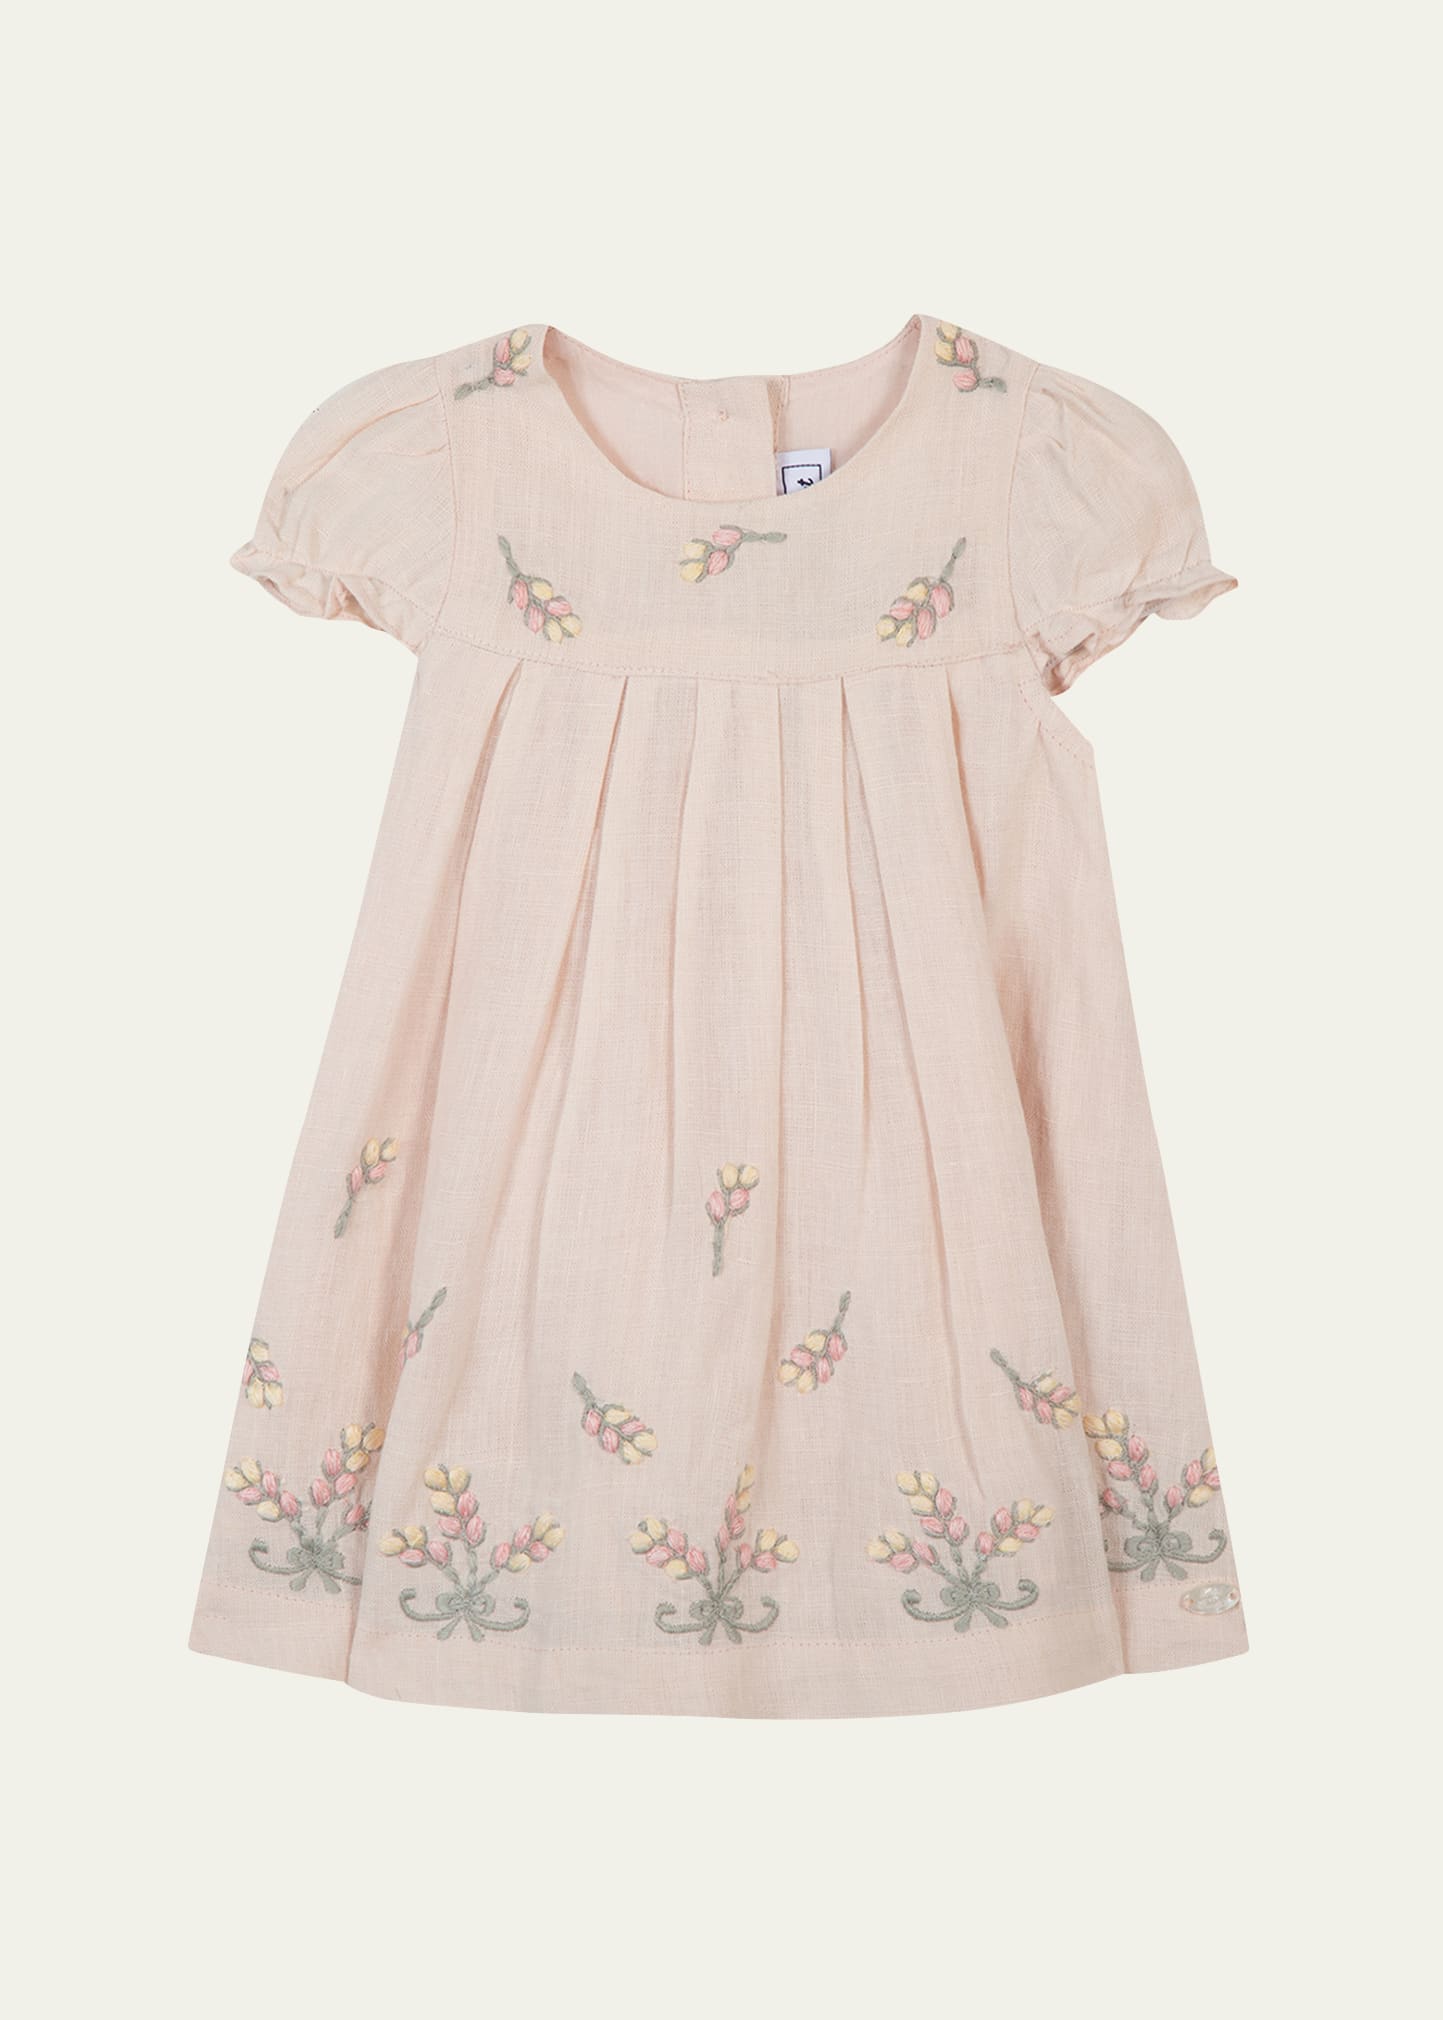 Girl's Linen Floral Embroidered Dress, Size 9M-3